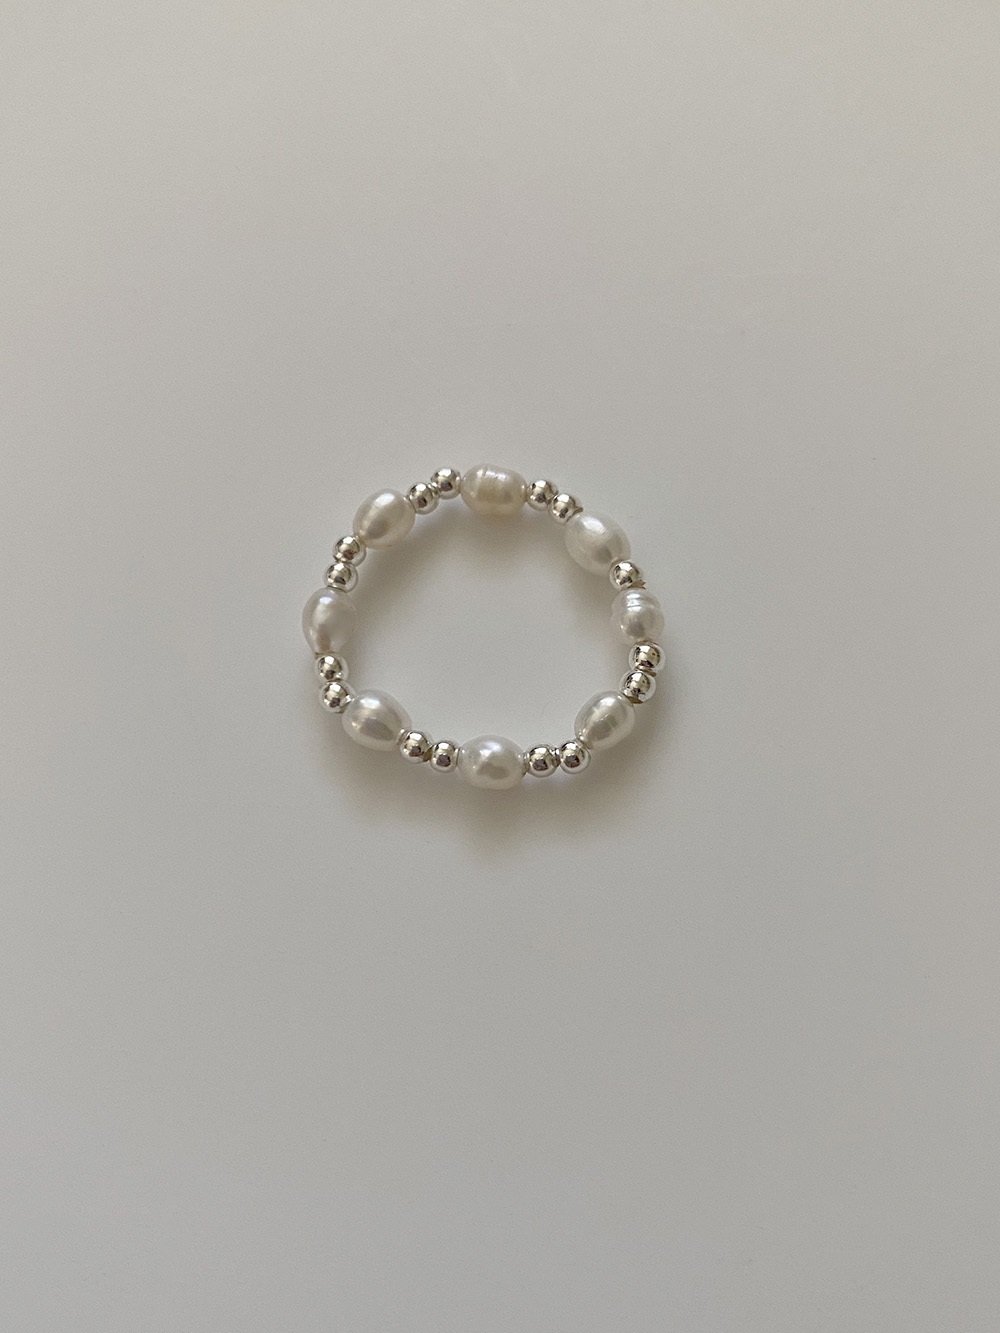 [92.5 silver] pearl beads ring  주문폭주 ! 9차재입고♡